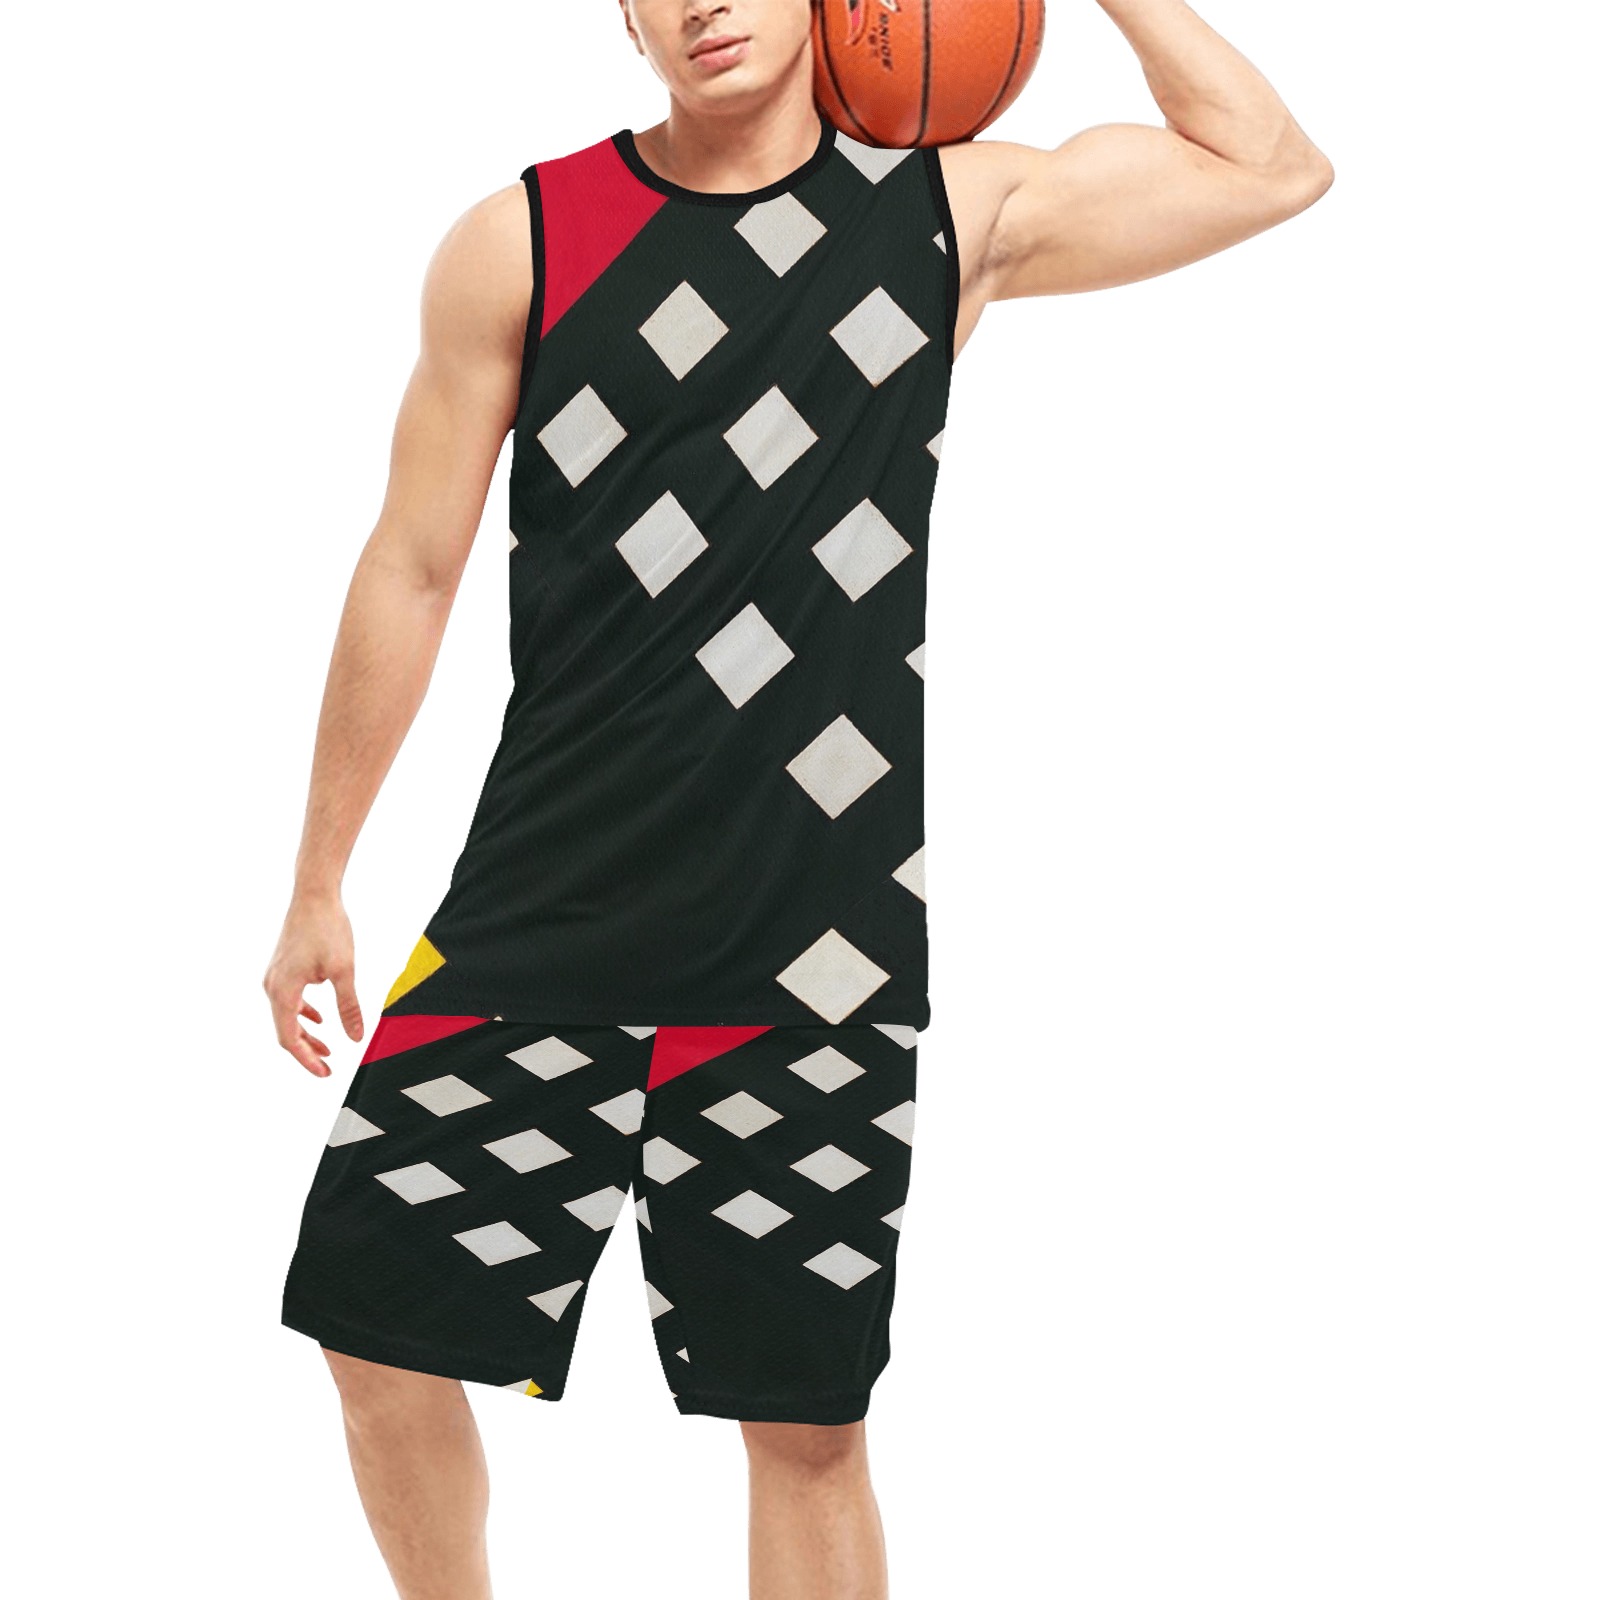 Counter-composition XV by Theo van Doesburg- Basketball Uniform with Pocket